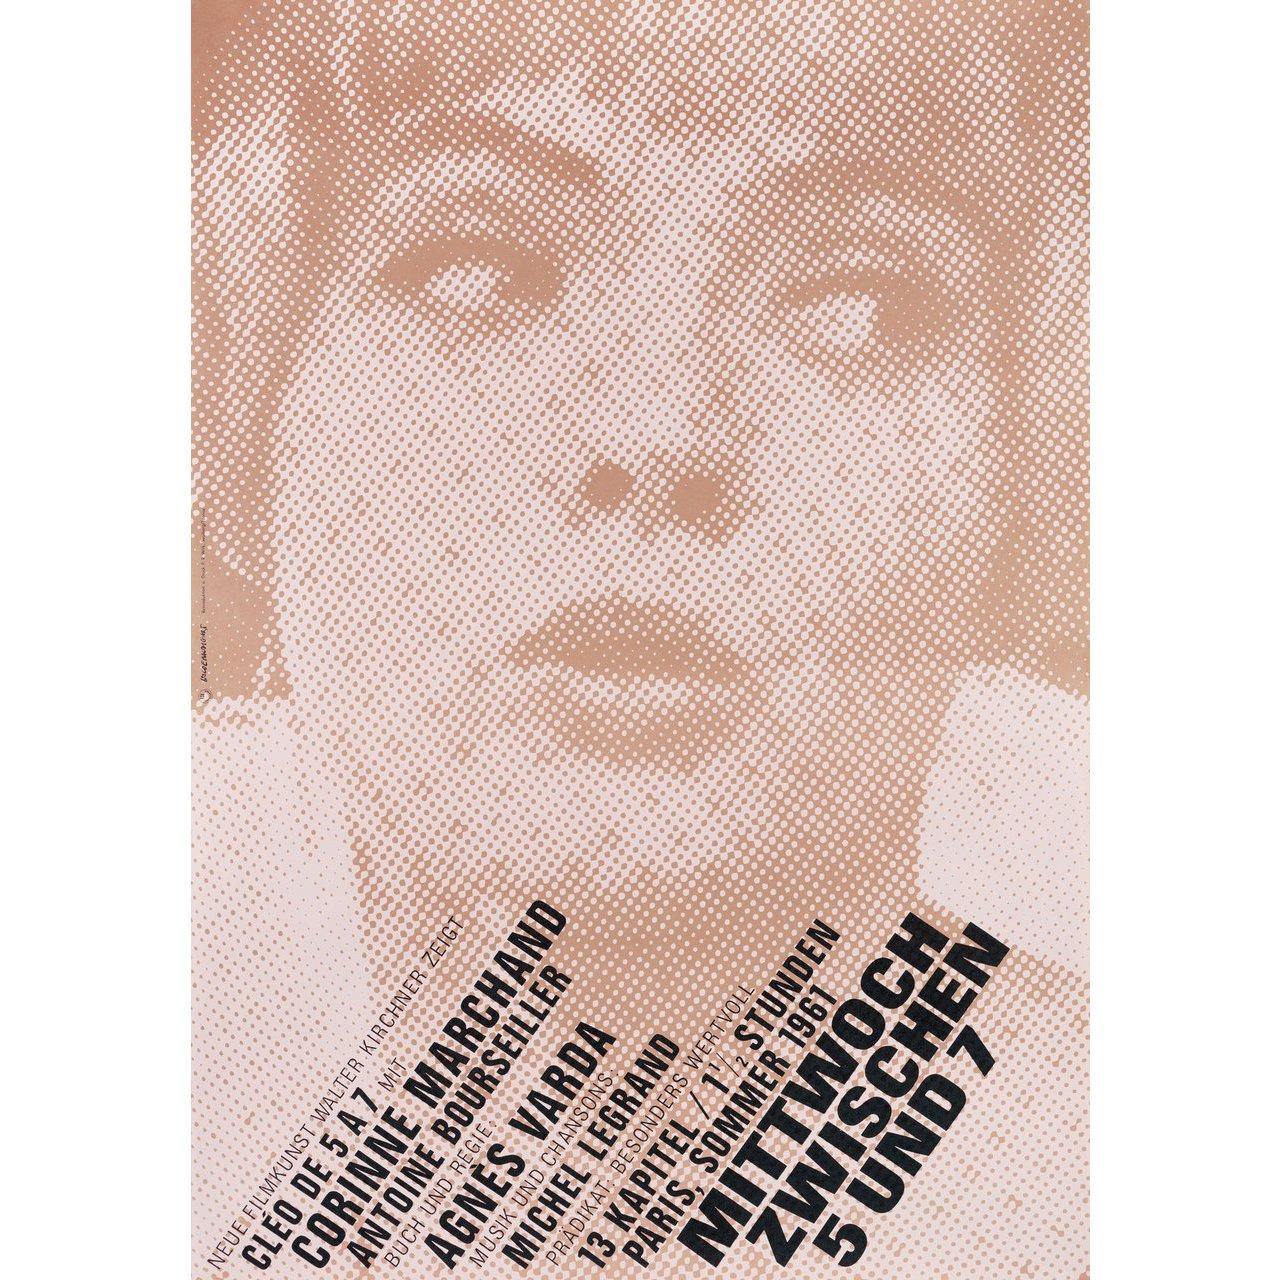 Original 1967 re-release German A1 poster by Isolde Baumgart for the 1962 film Cleo from 5 to 7 (Cleo de cinq a sept) directed by Agnes Varda with Corinne Marchand / Antoine Bourseiller / Dominique Davray / Dorothee Blanck. Very Good-Fine condition,